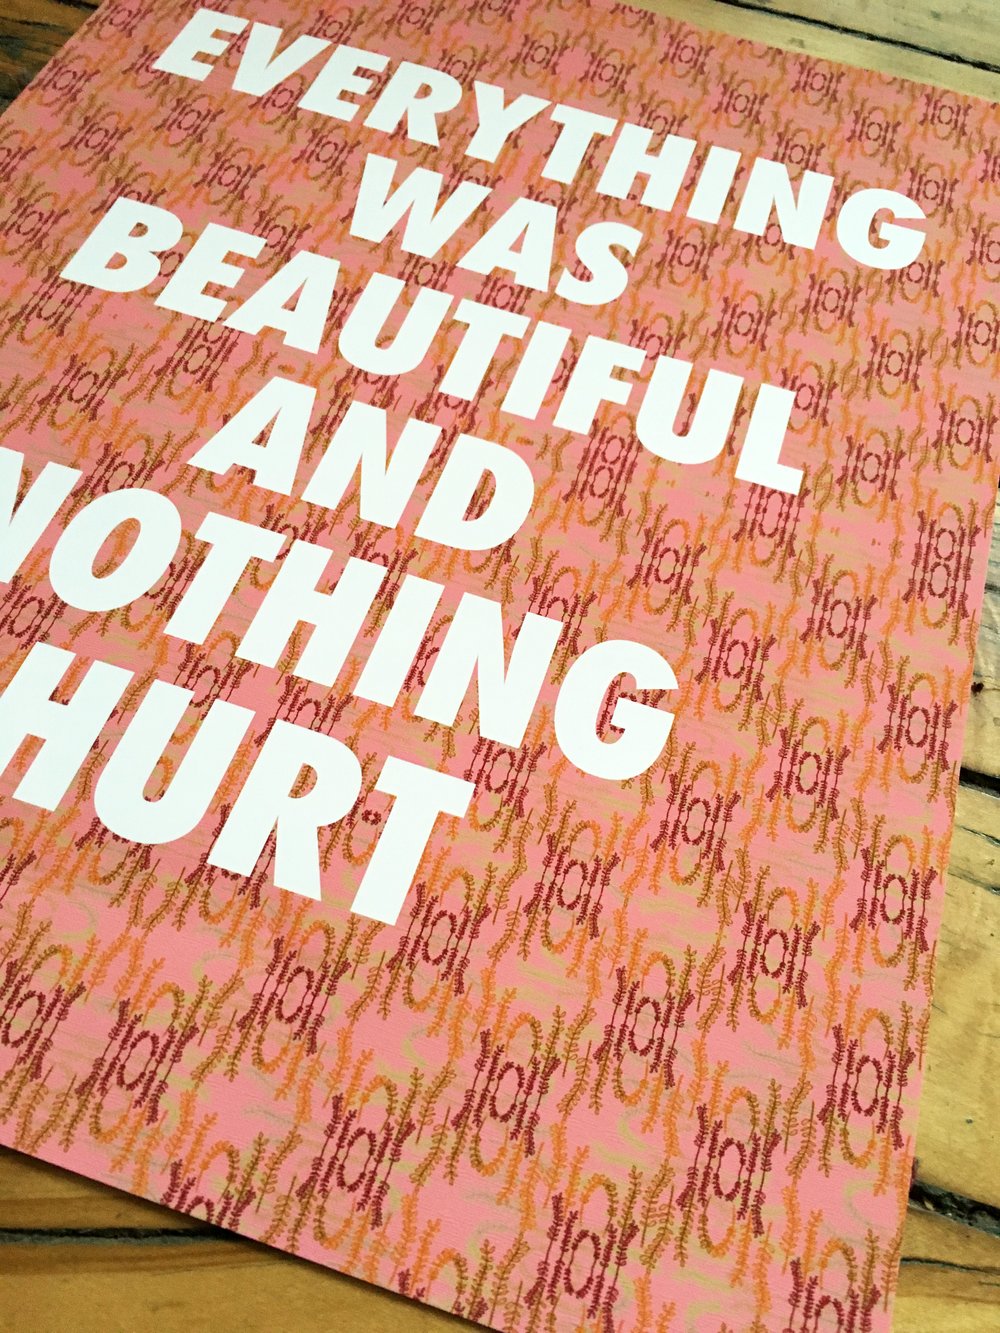 Everything was Beautiful and Nothing Hurt-11 x 14 print